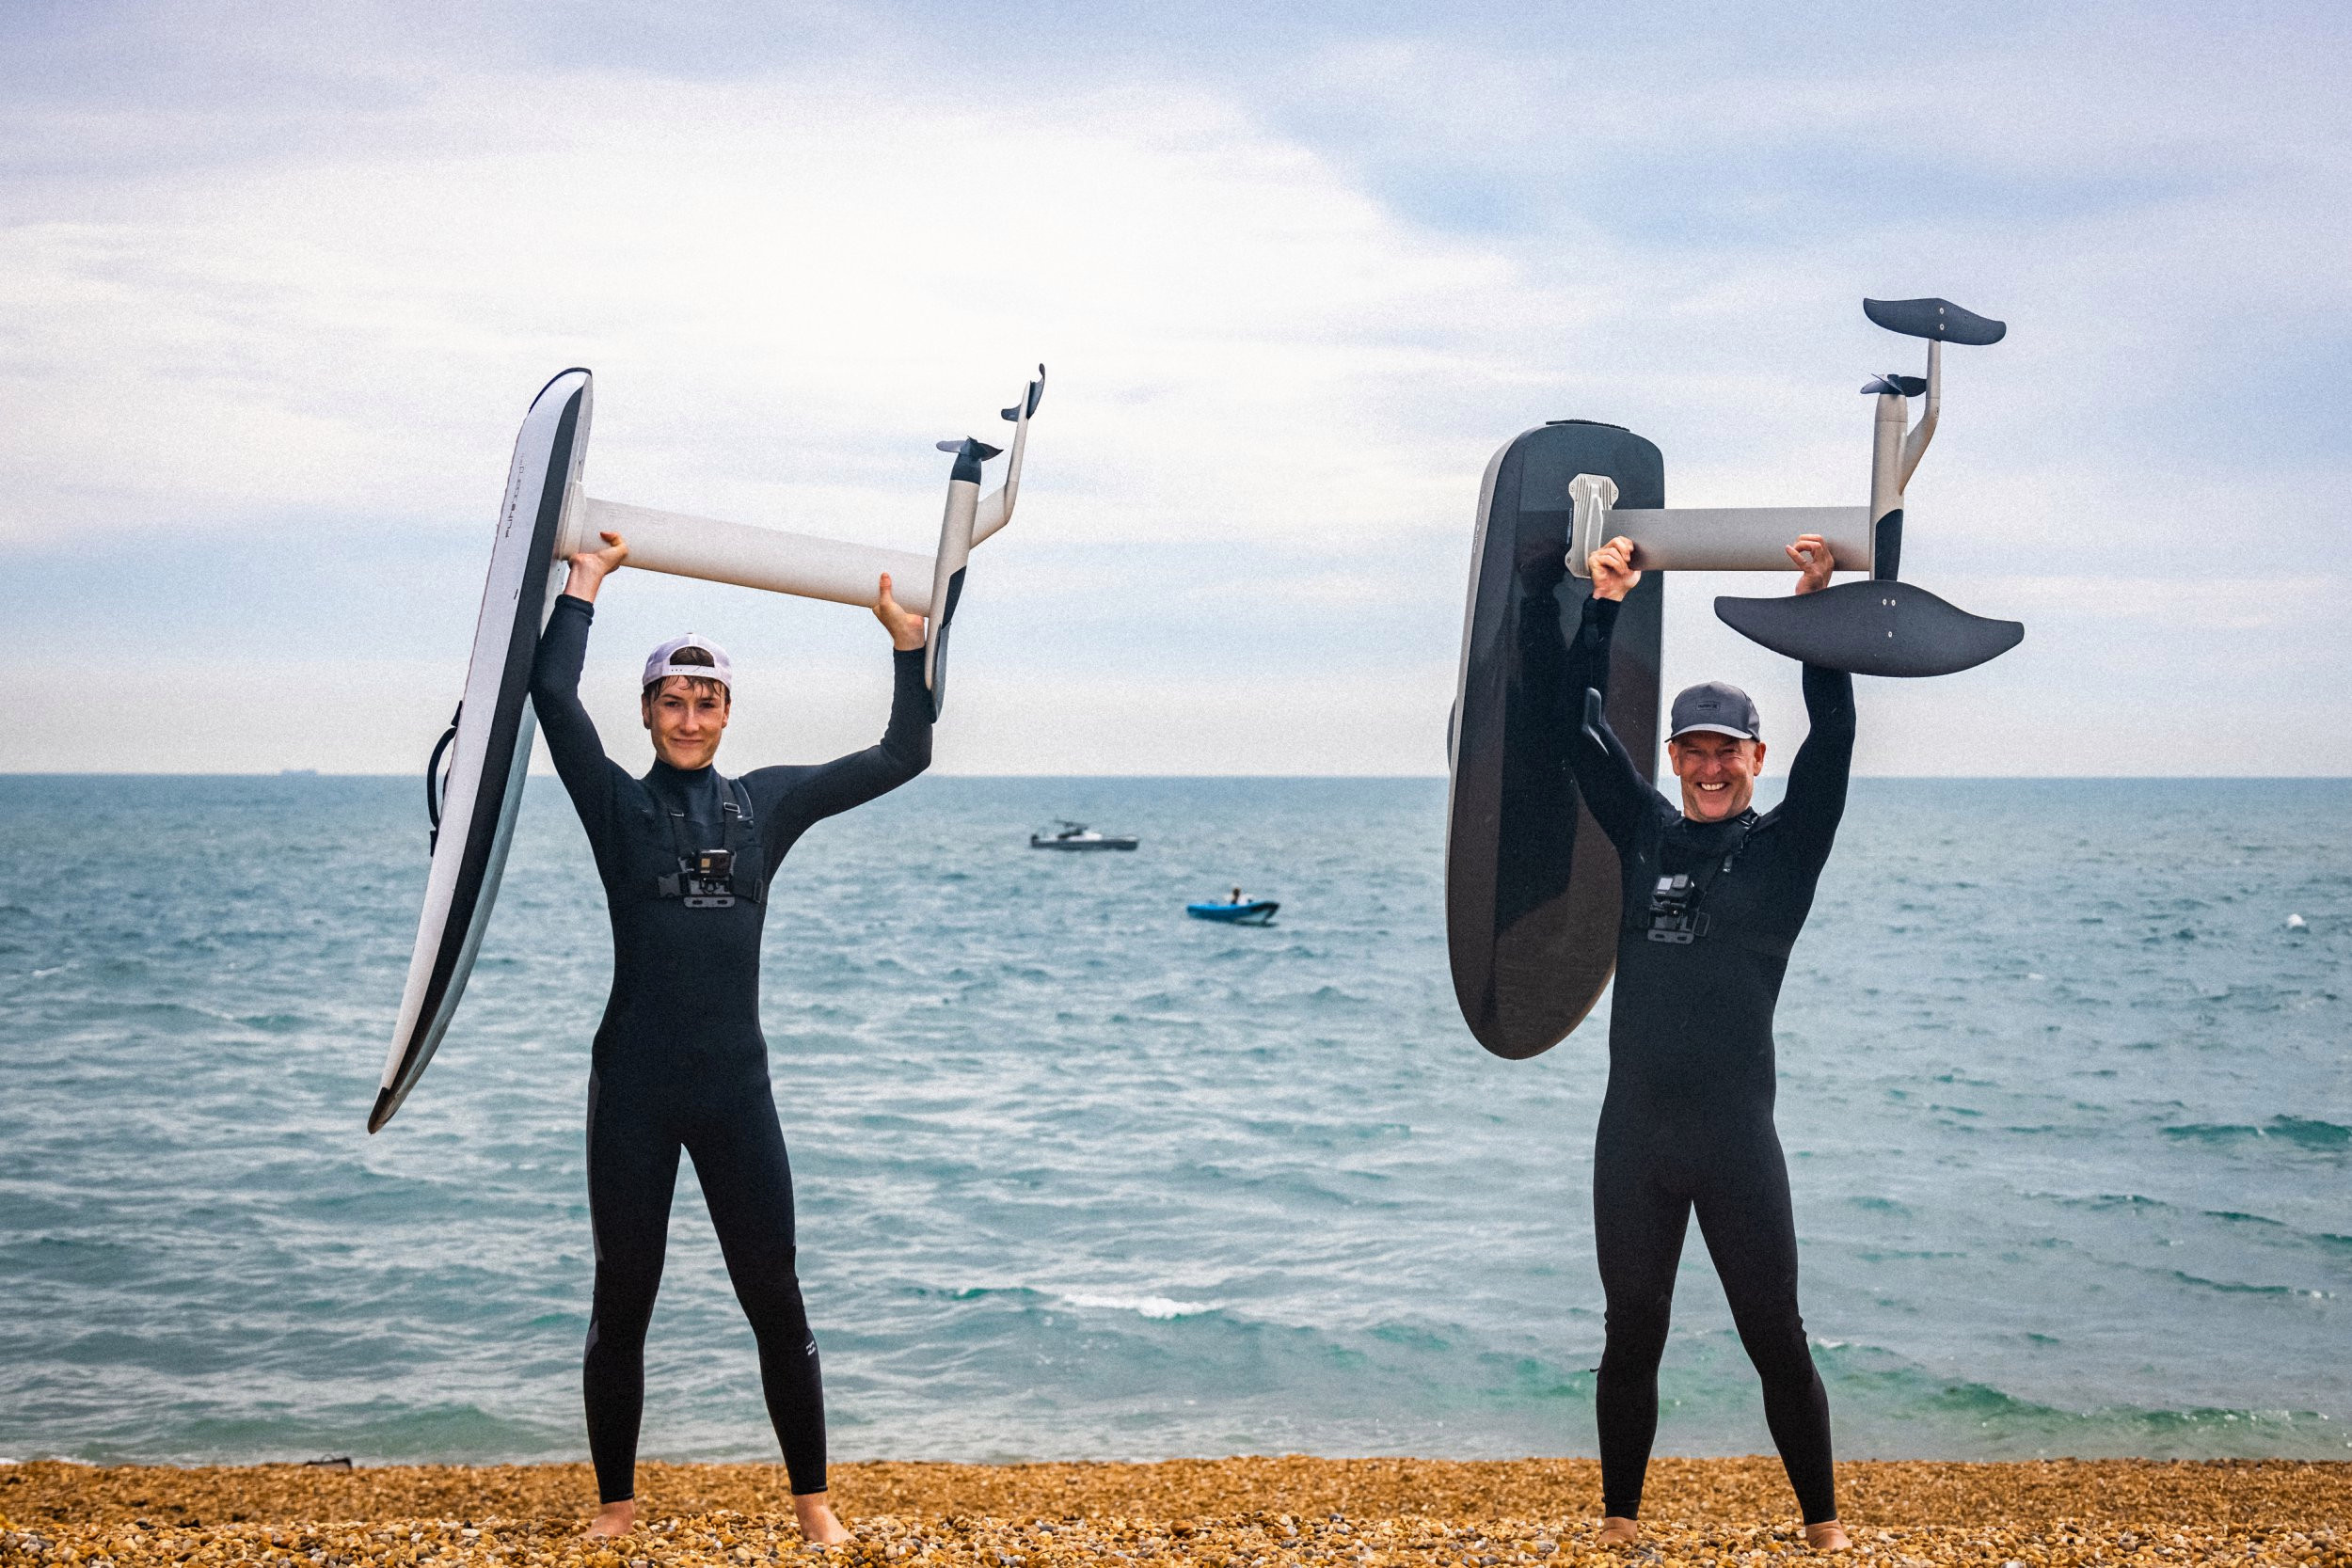 Father and son set world record crossing English Channel on high-tech eFoil boards